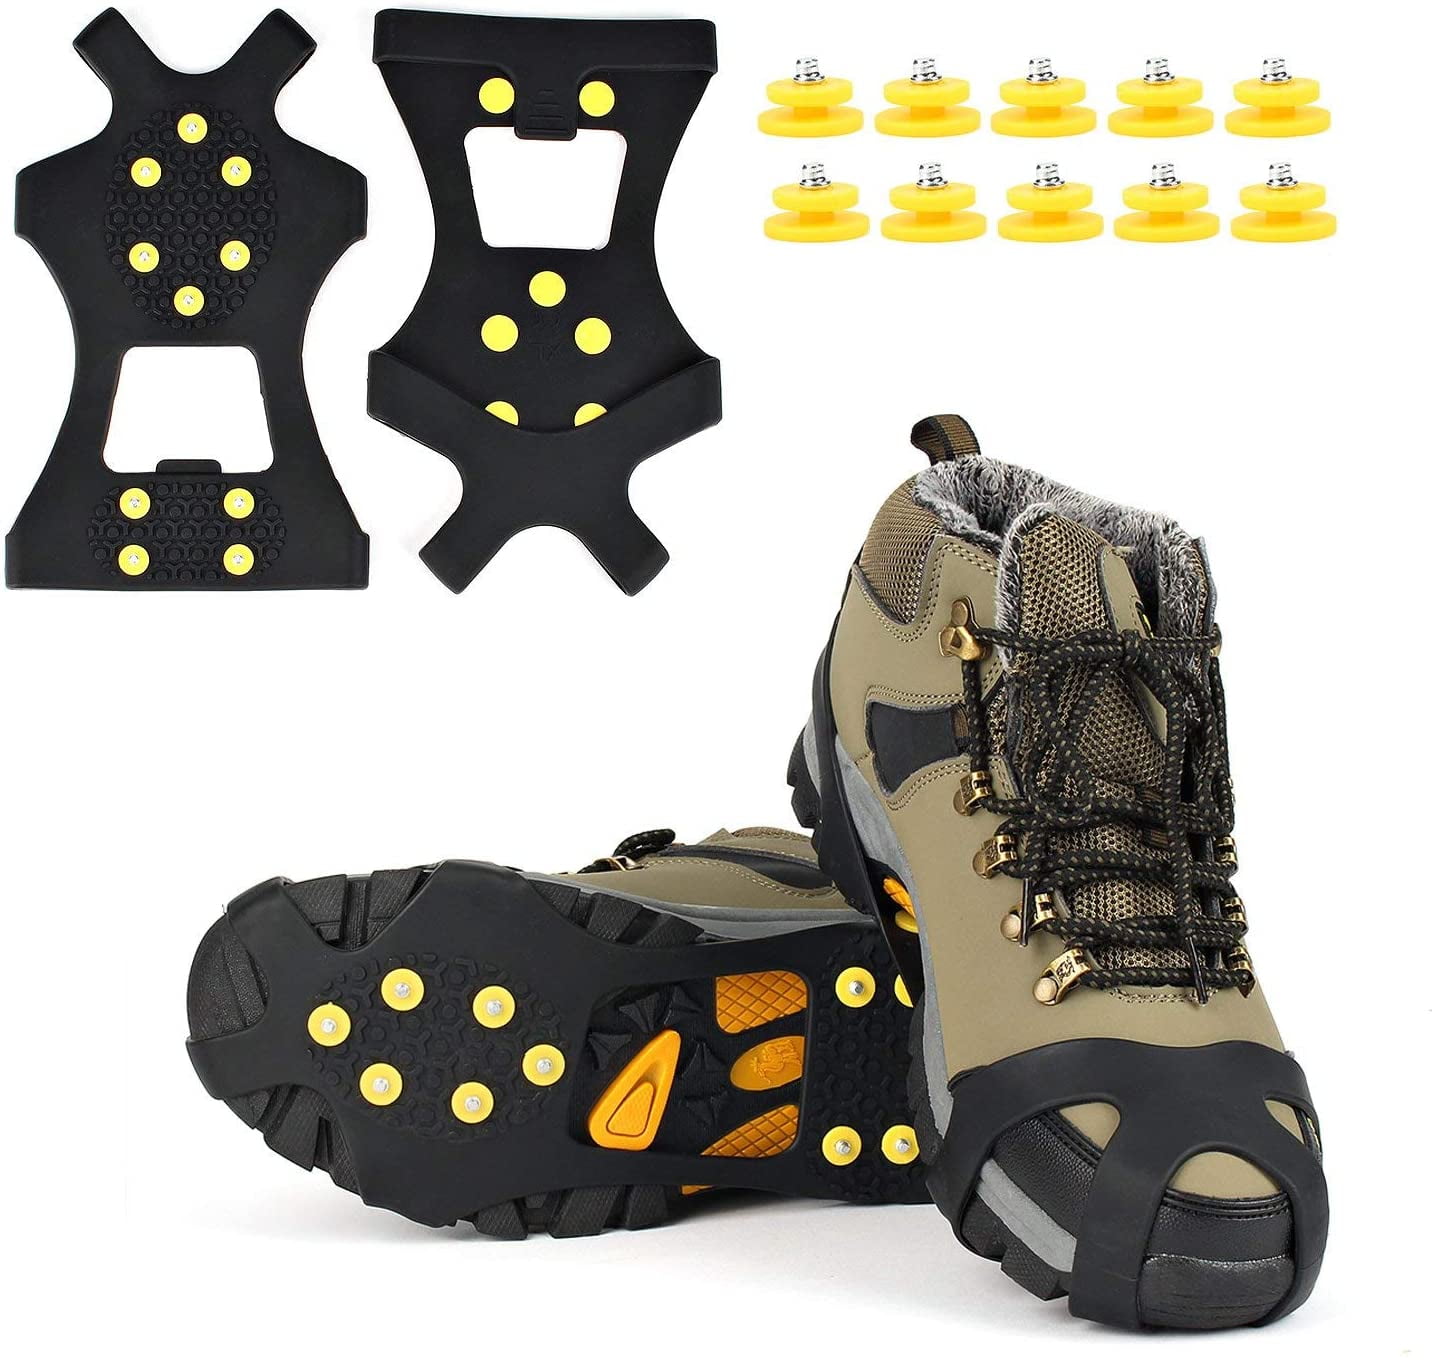 ICE SNOW SPIKES GRIPS GRIPPERS ANTI SLIP CLEATS FOR SHOES BOOTS OVERSHOE  LARGE 